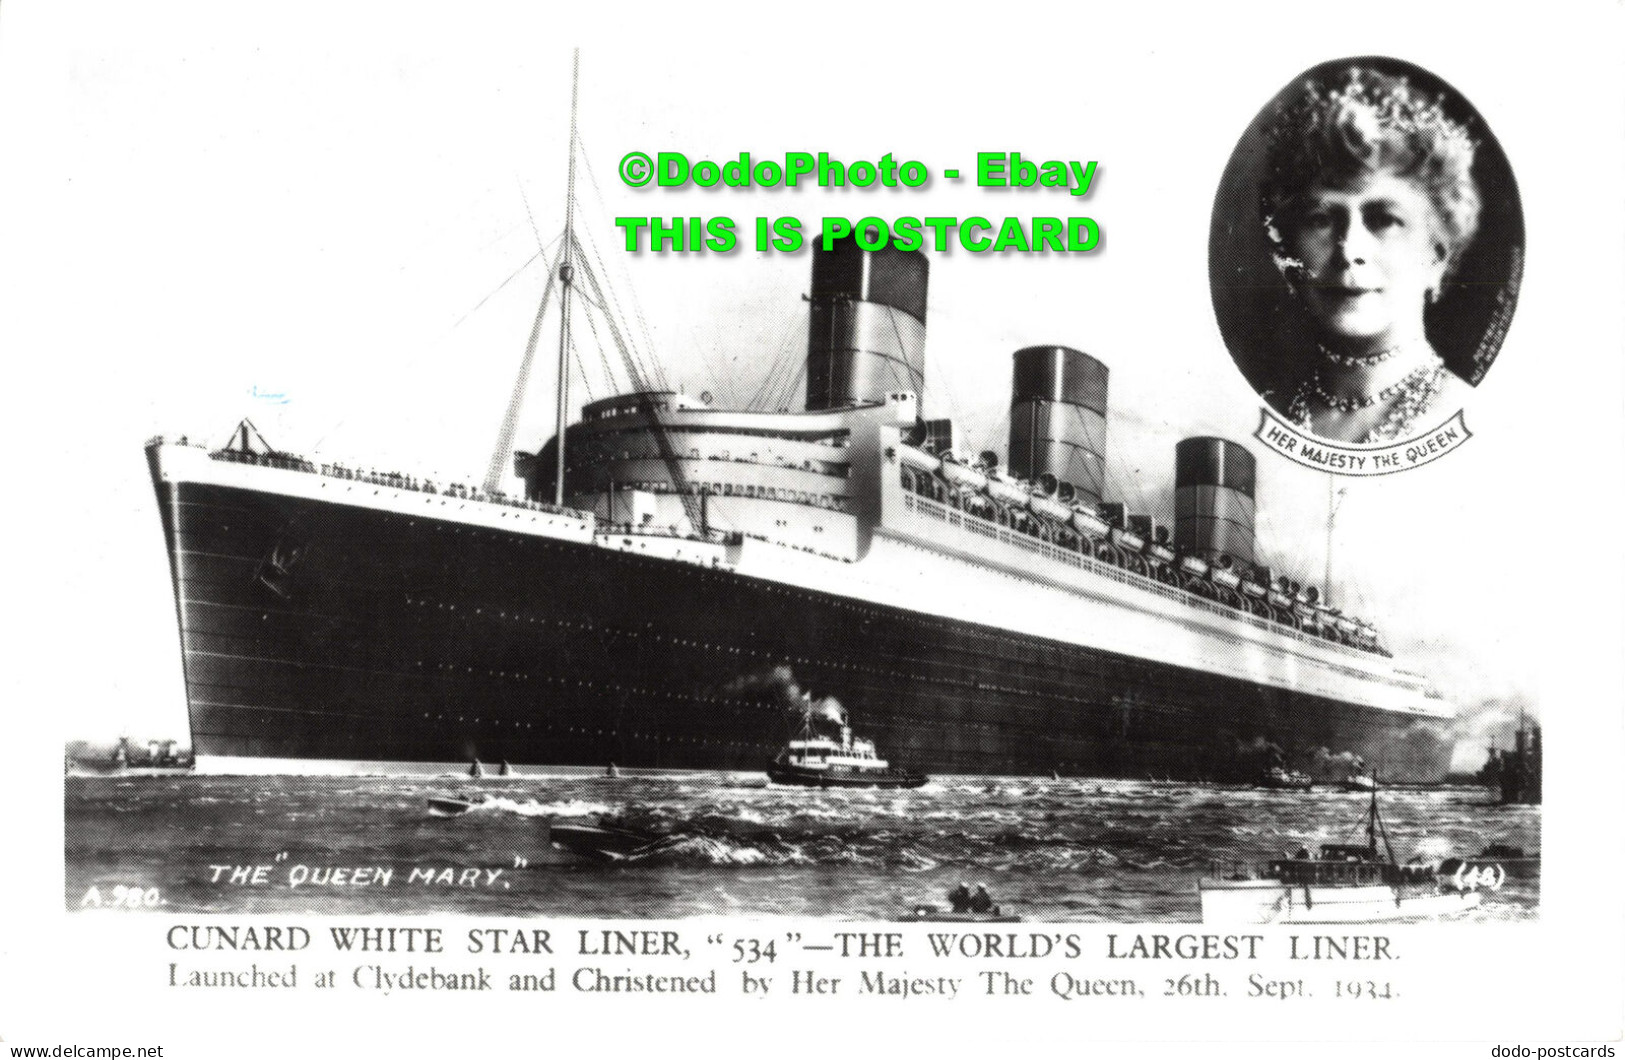 R355277 Cunard White Star Liner. 534. The World Largest Liner. The Queen Mary. L - World